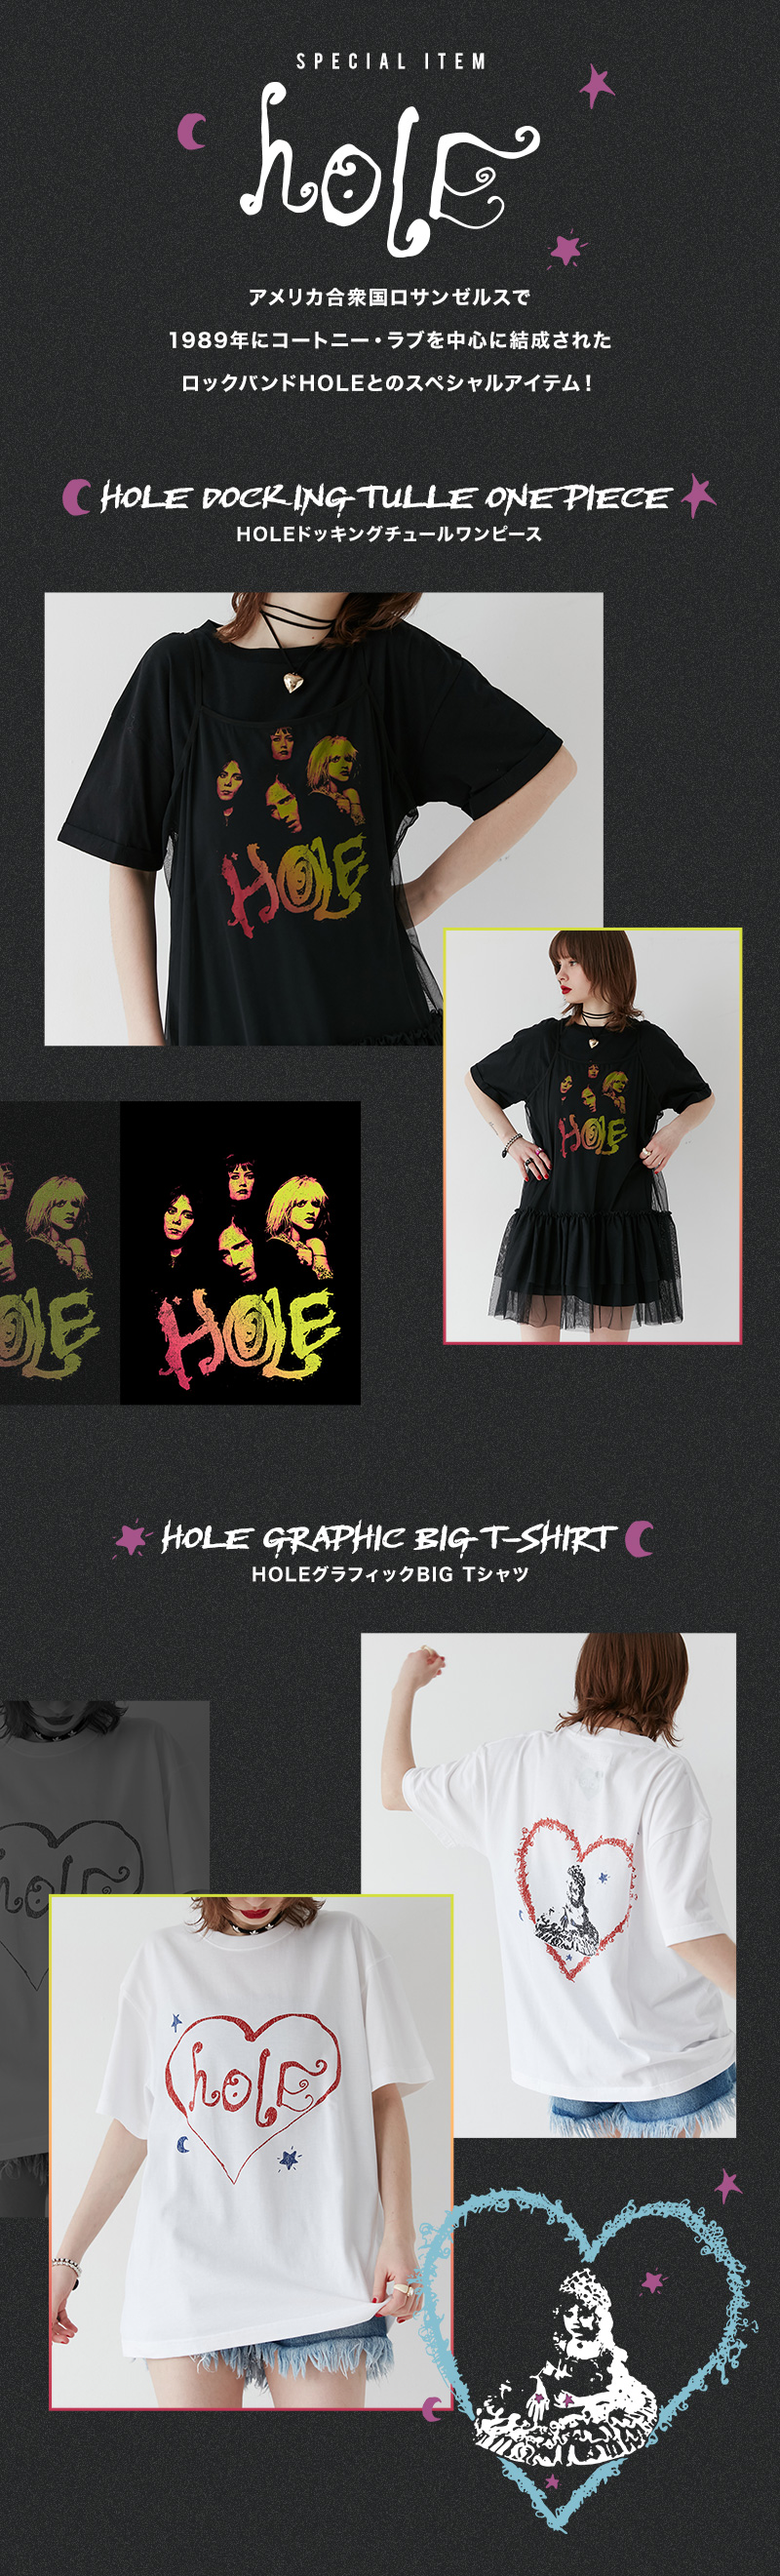 HOLE SPECIAL ITEM